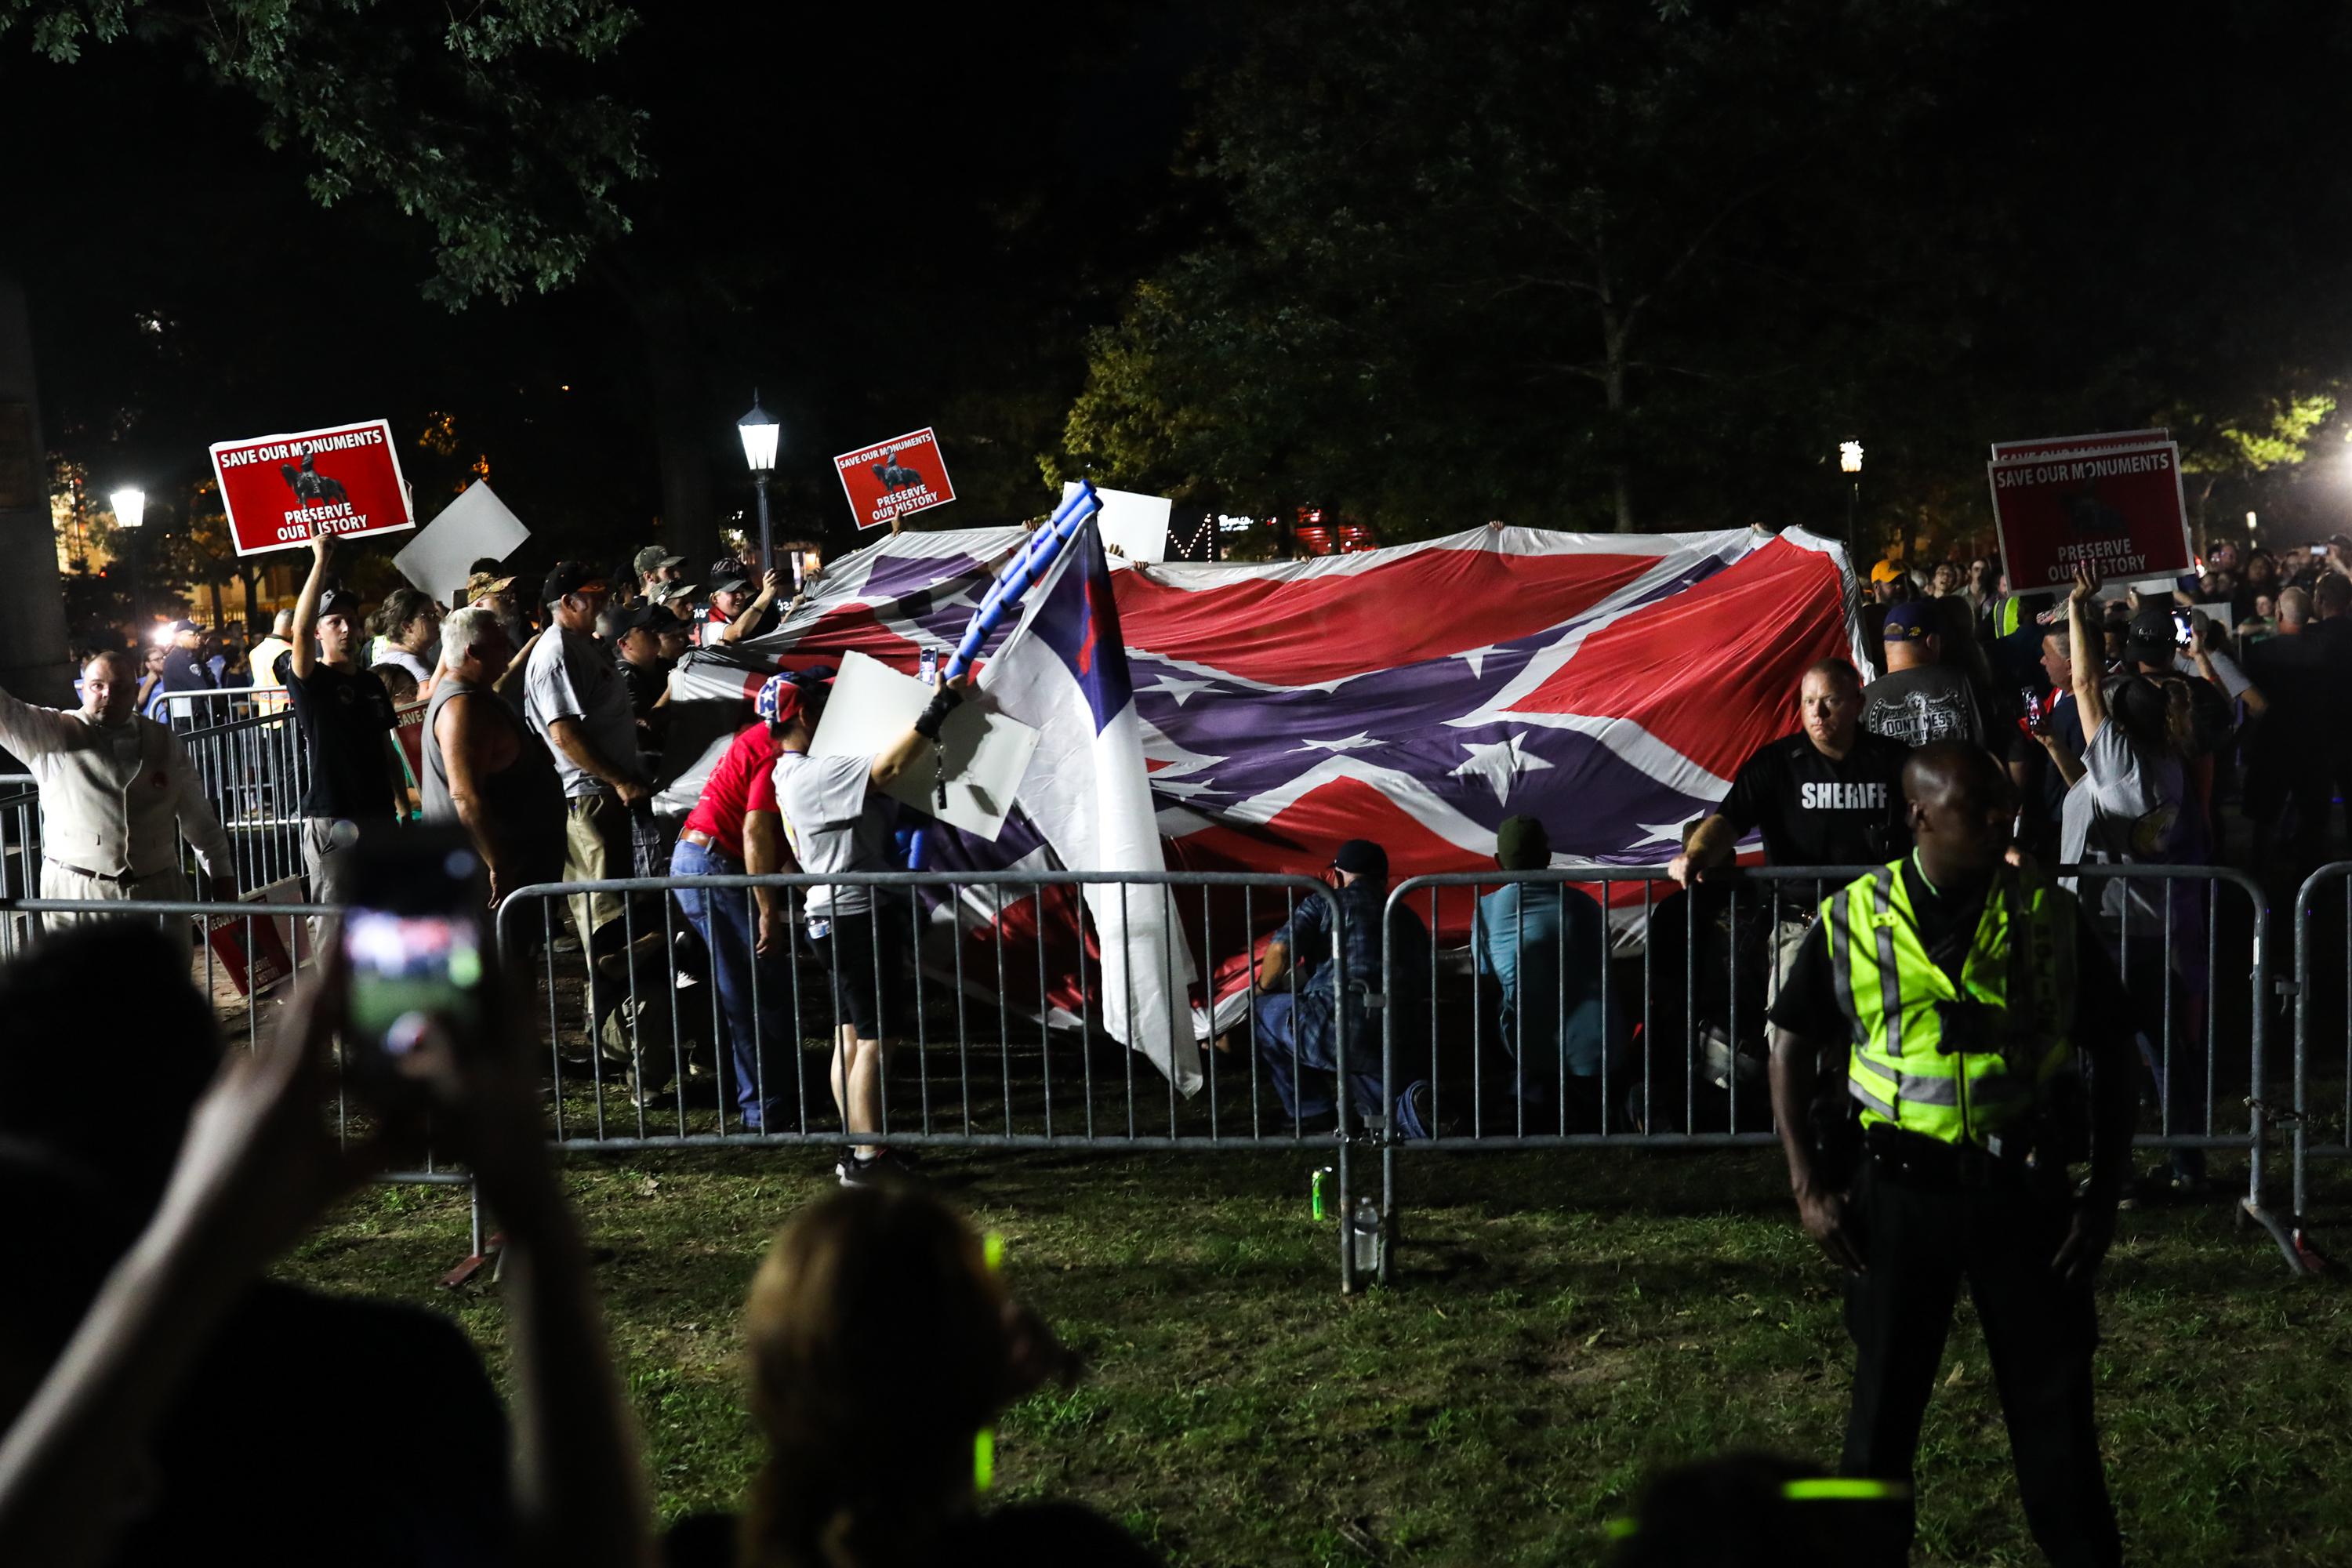 Pro-confederacy protestors hold up Christian Flags and Confederate flags inside a pen guarded by police. 